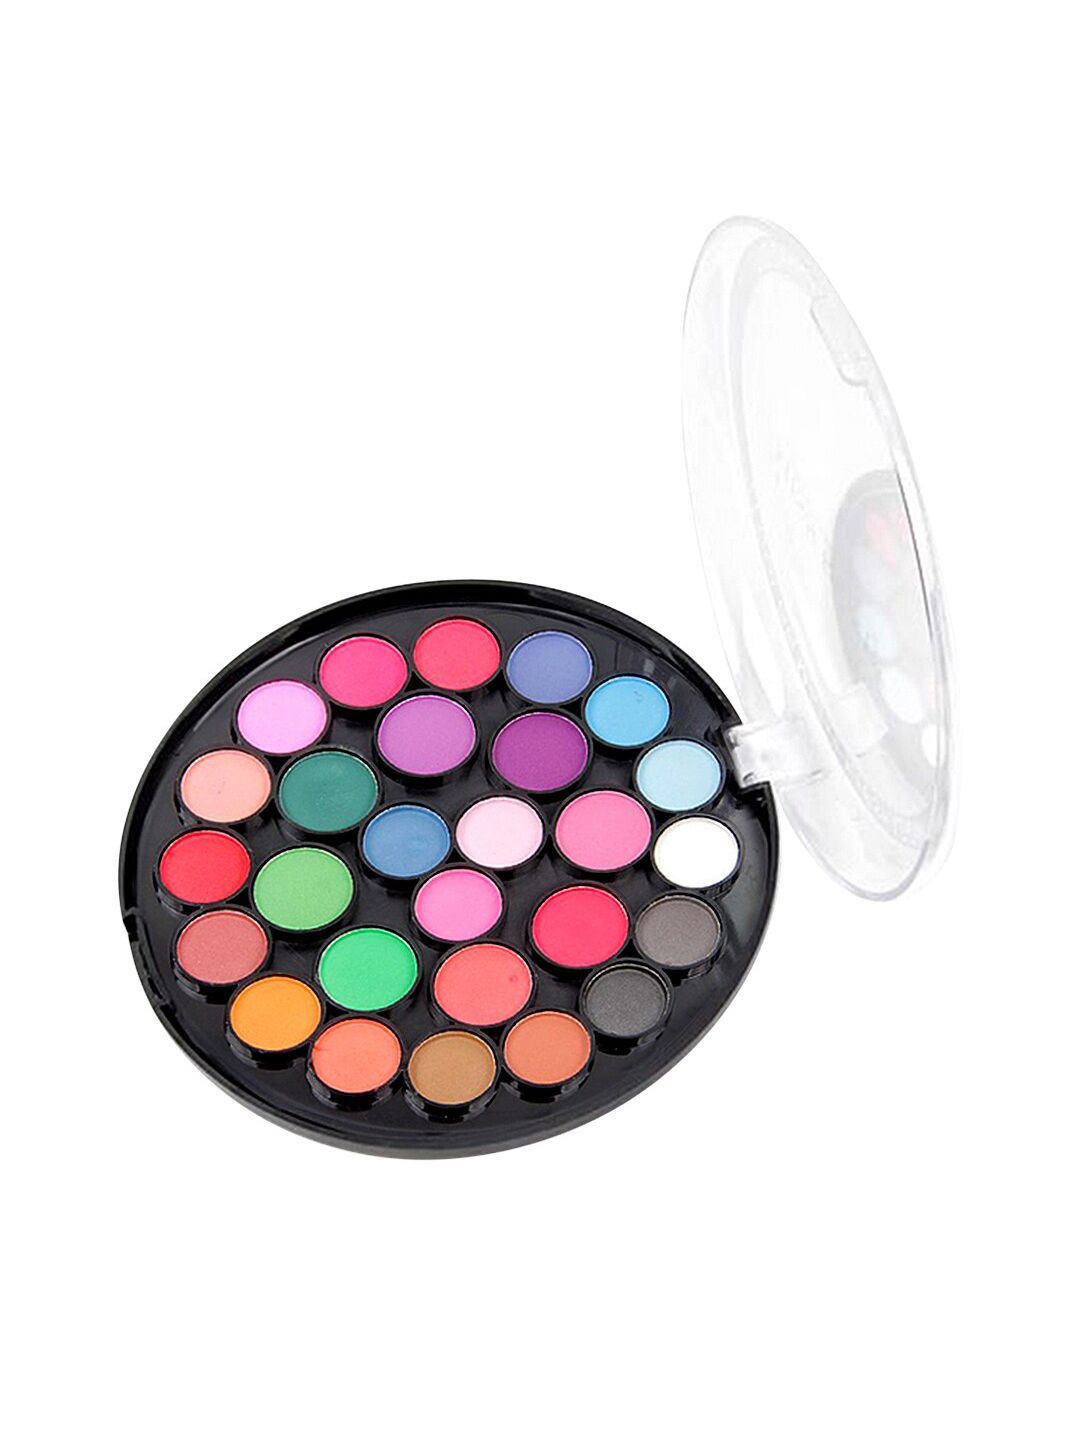 MISS ROSE 27 Color Matte Eyeshadow Palette MY02 Price in India